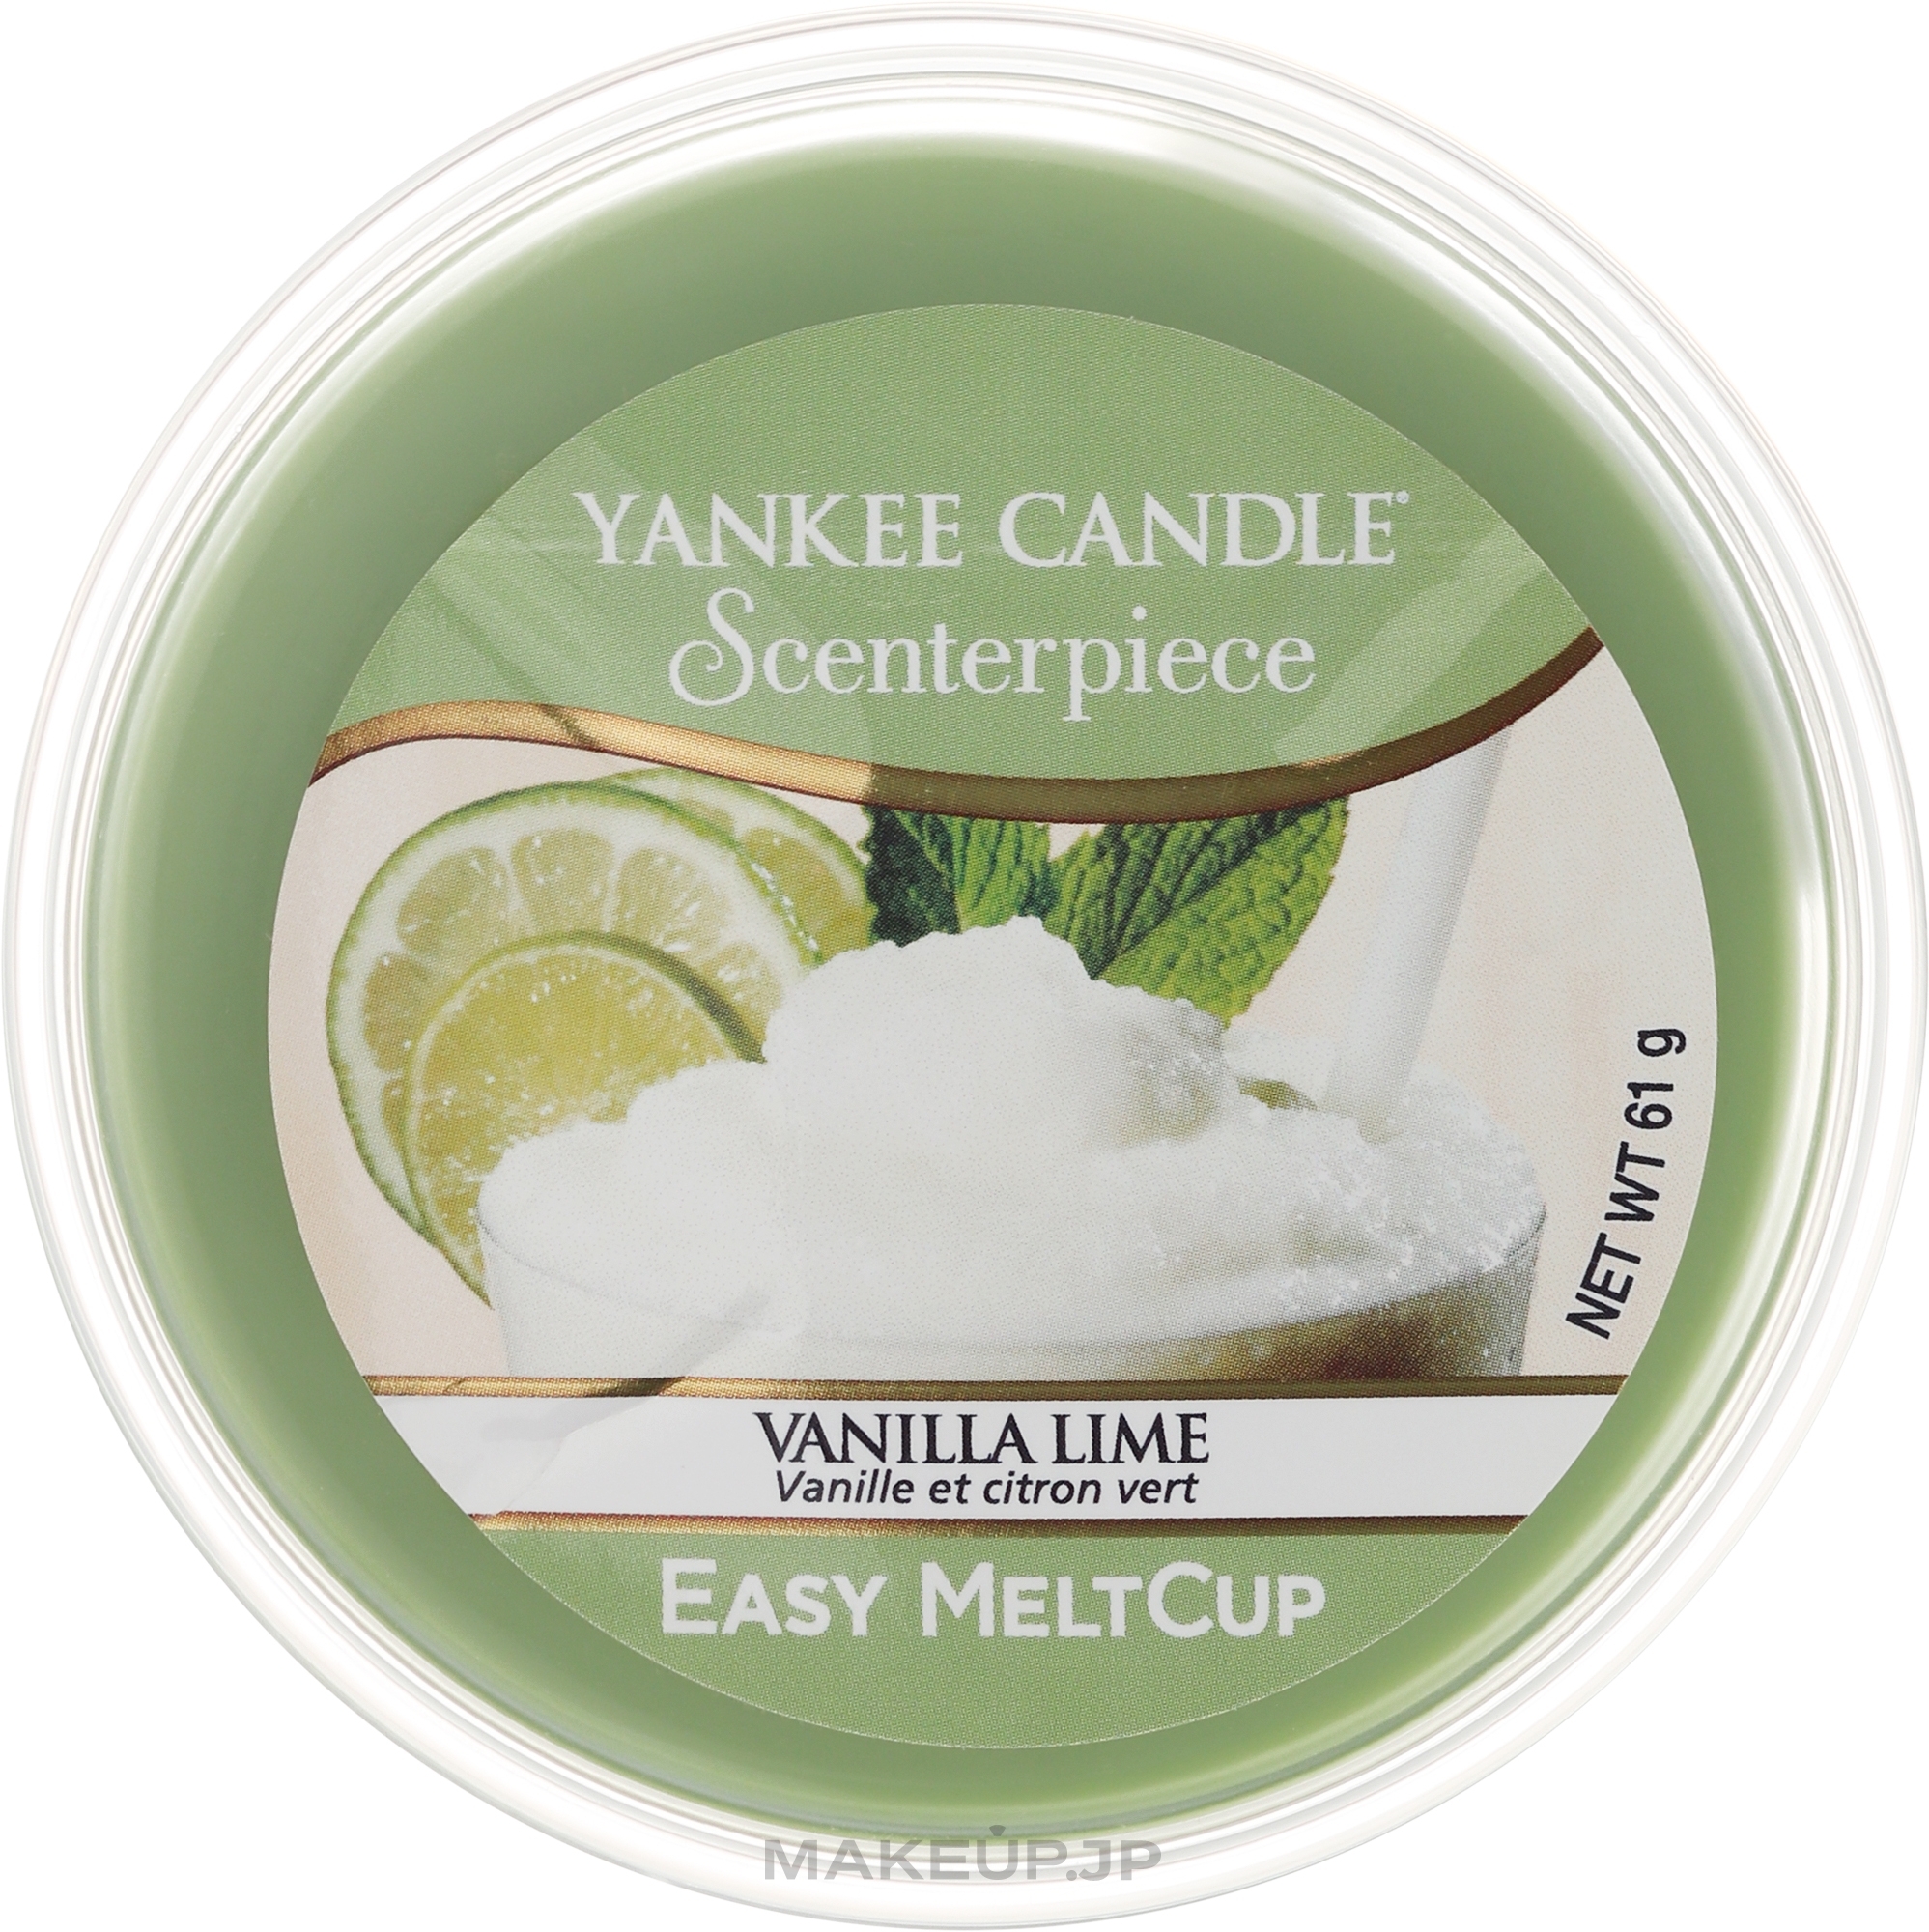 Scented Wax - Yankee Candle Vanilla Lime Scenterpiece Melt Cup — photo 61 g